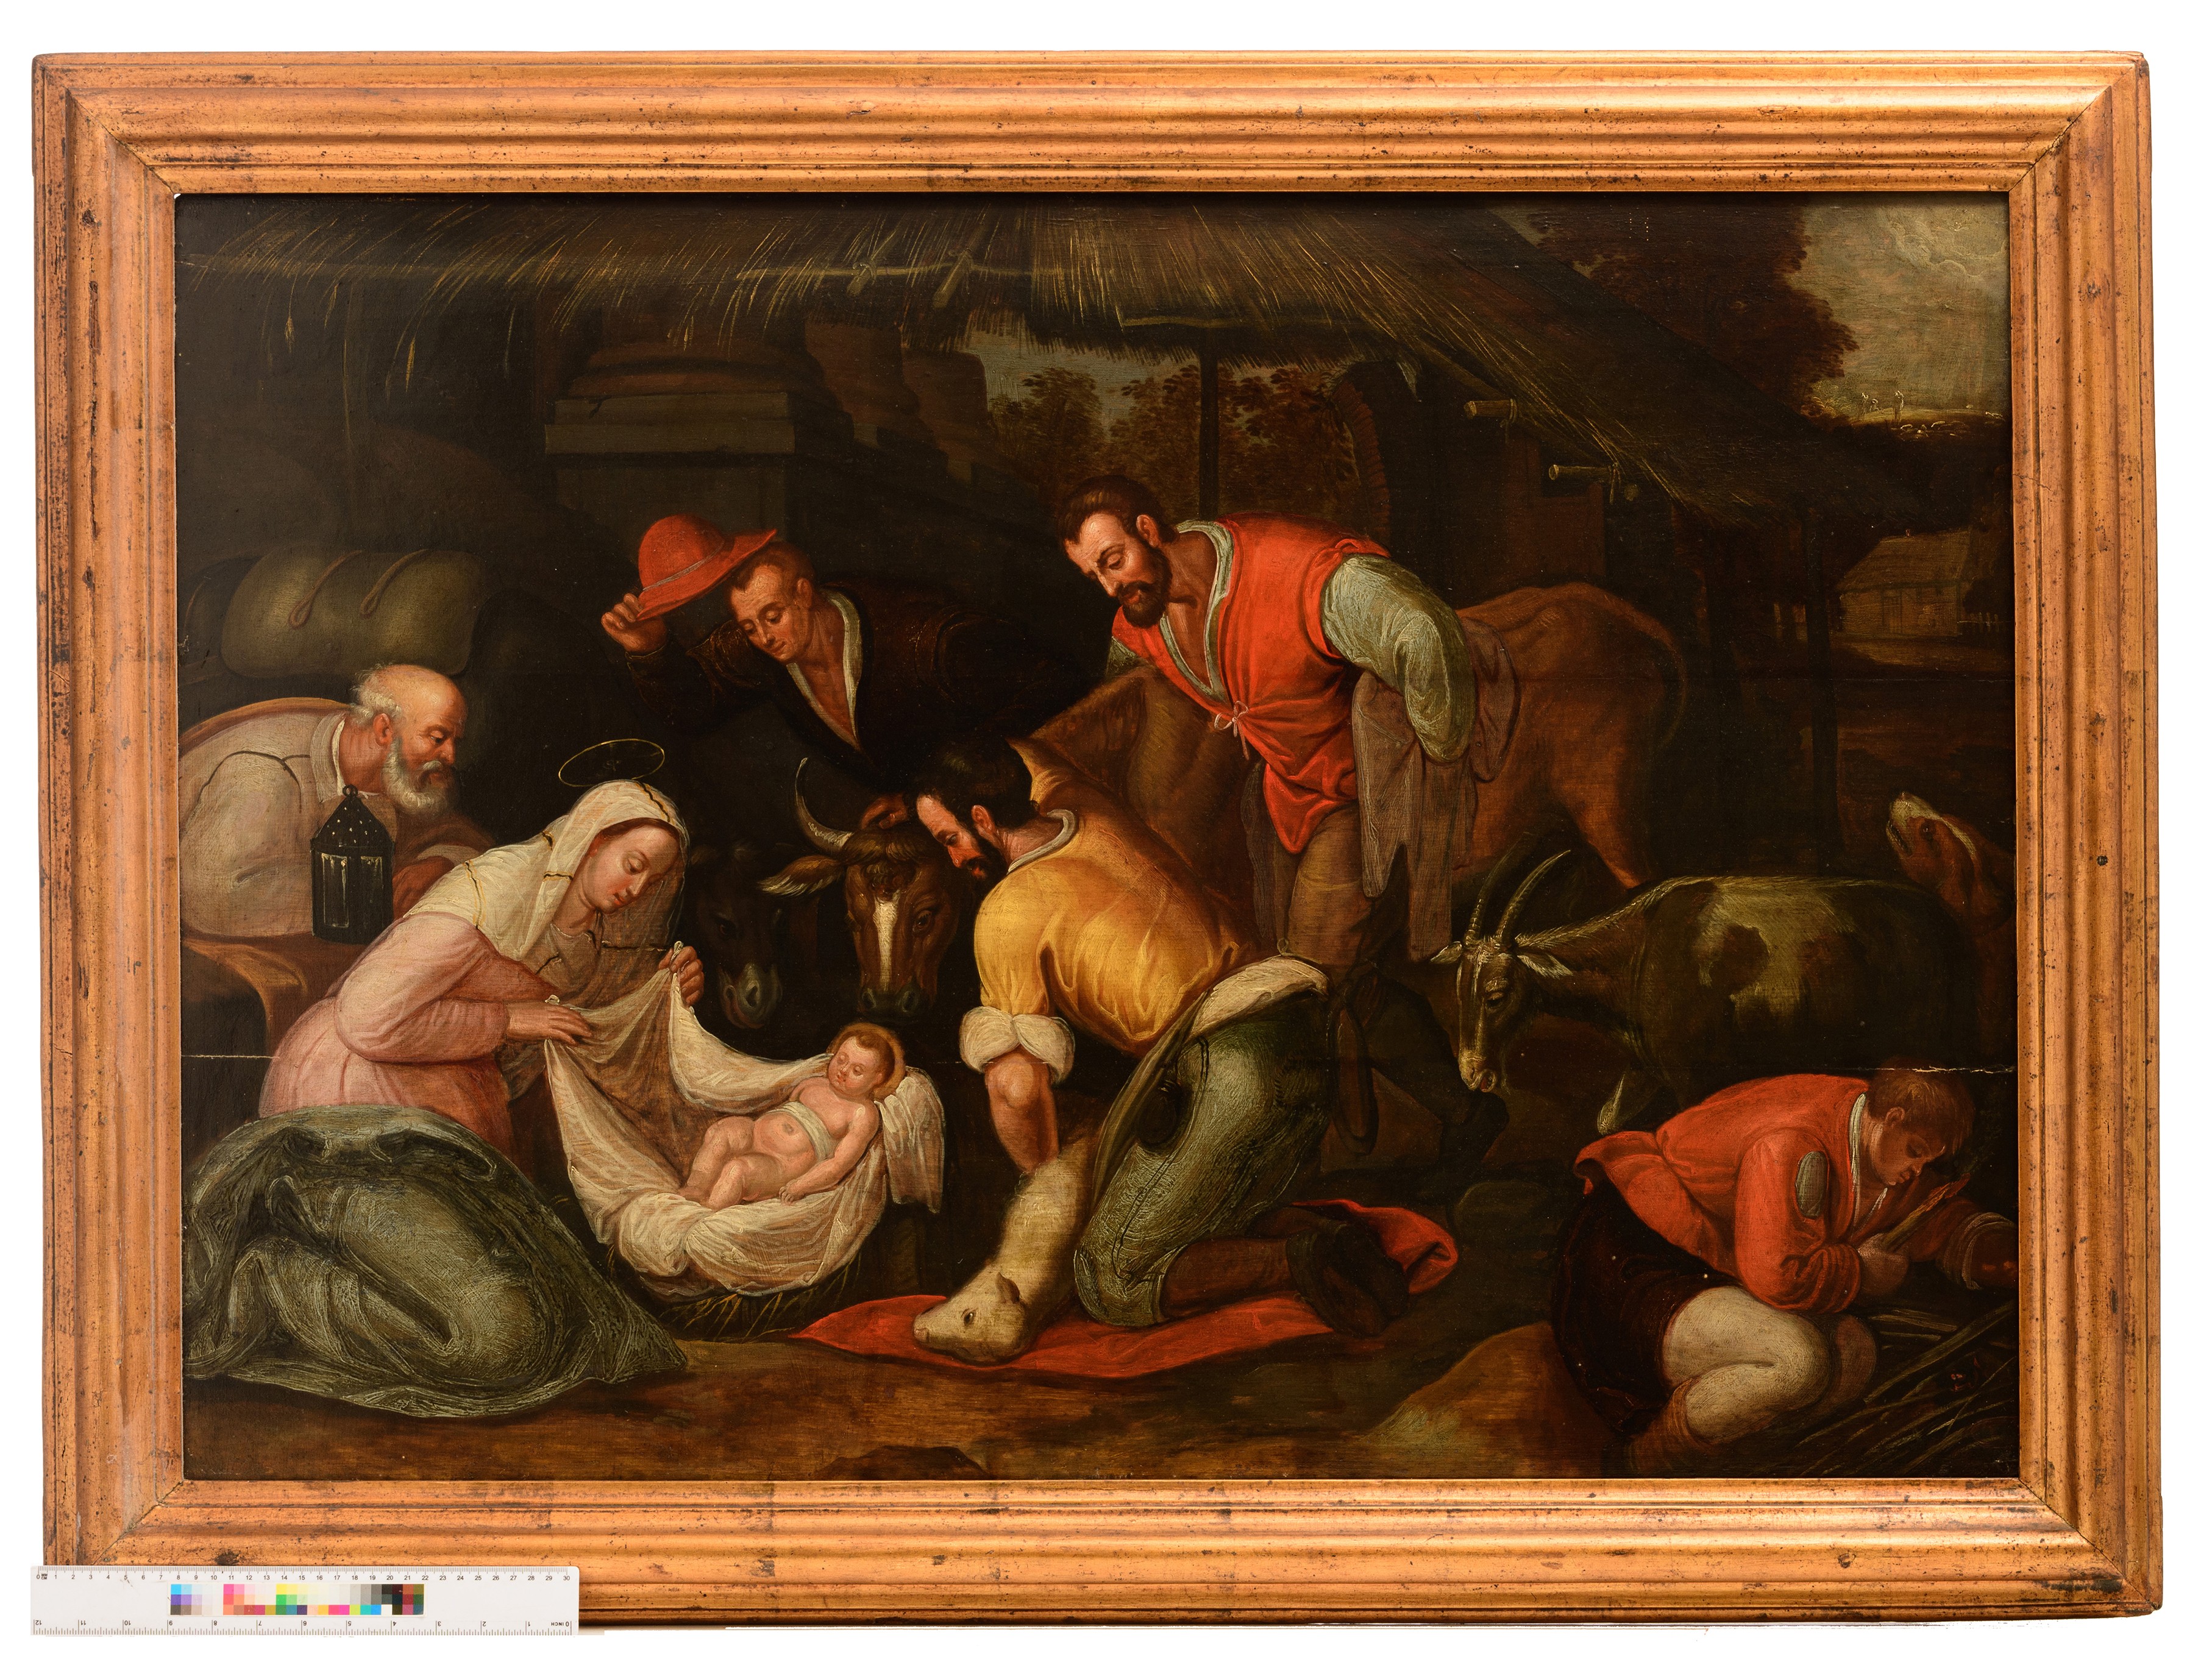 The adoration of the shepherds, late Antwerp Mannerism, 17thC, oil on panel, 74 x 105 cm - Image 4 of 8